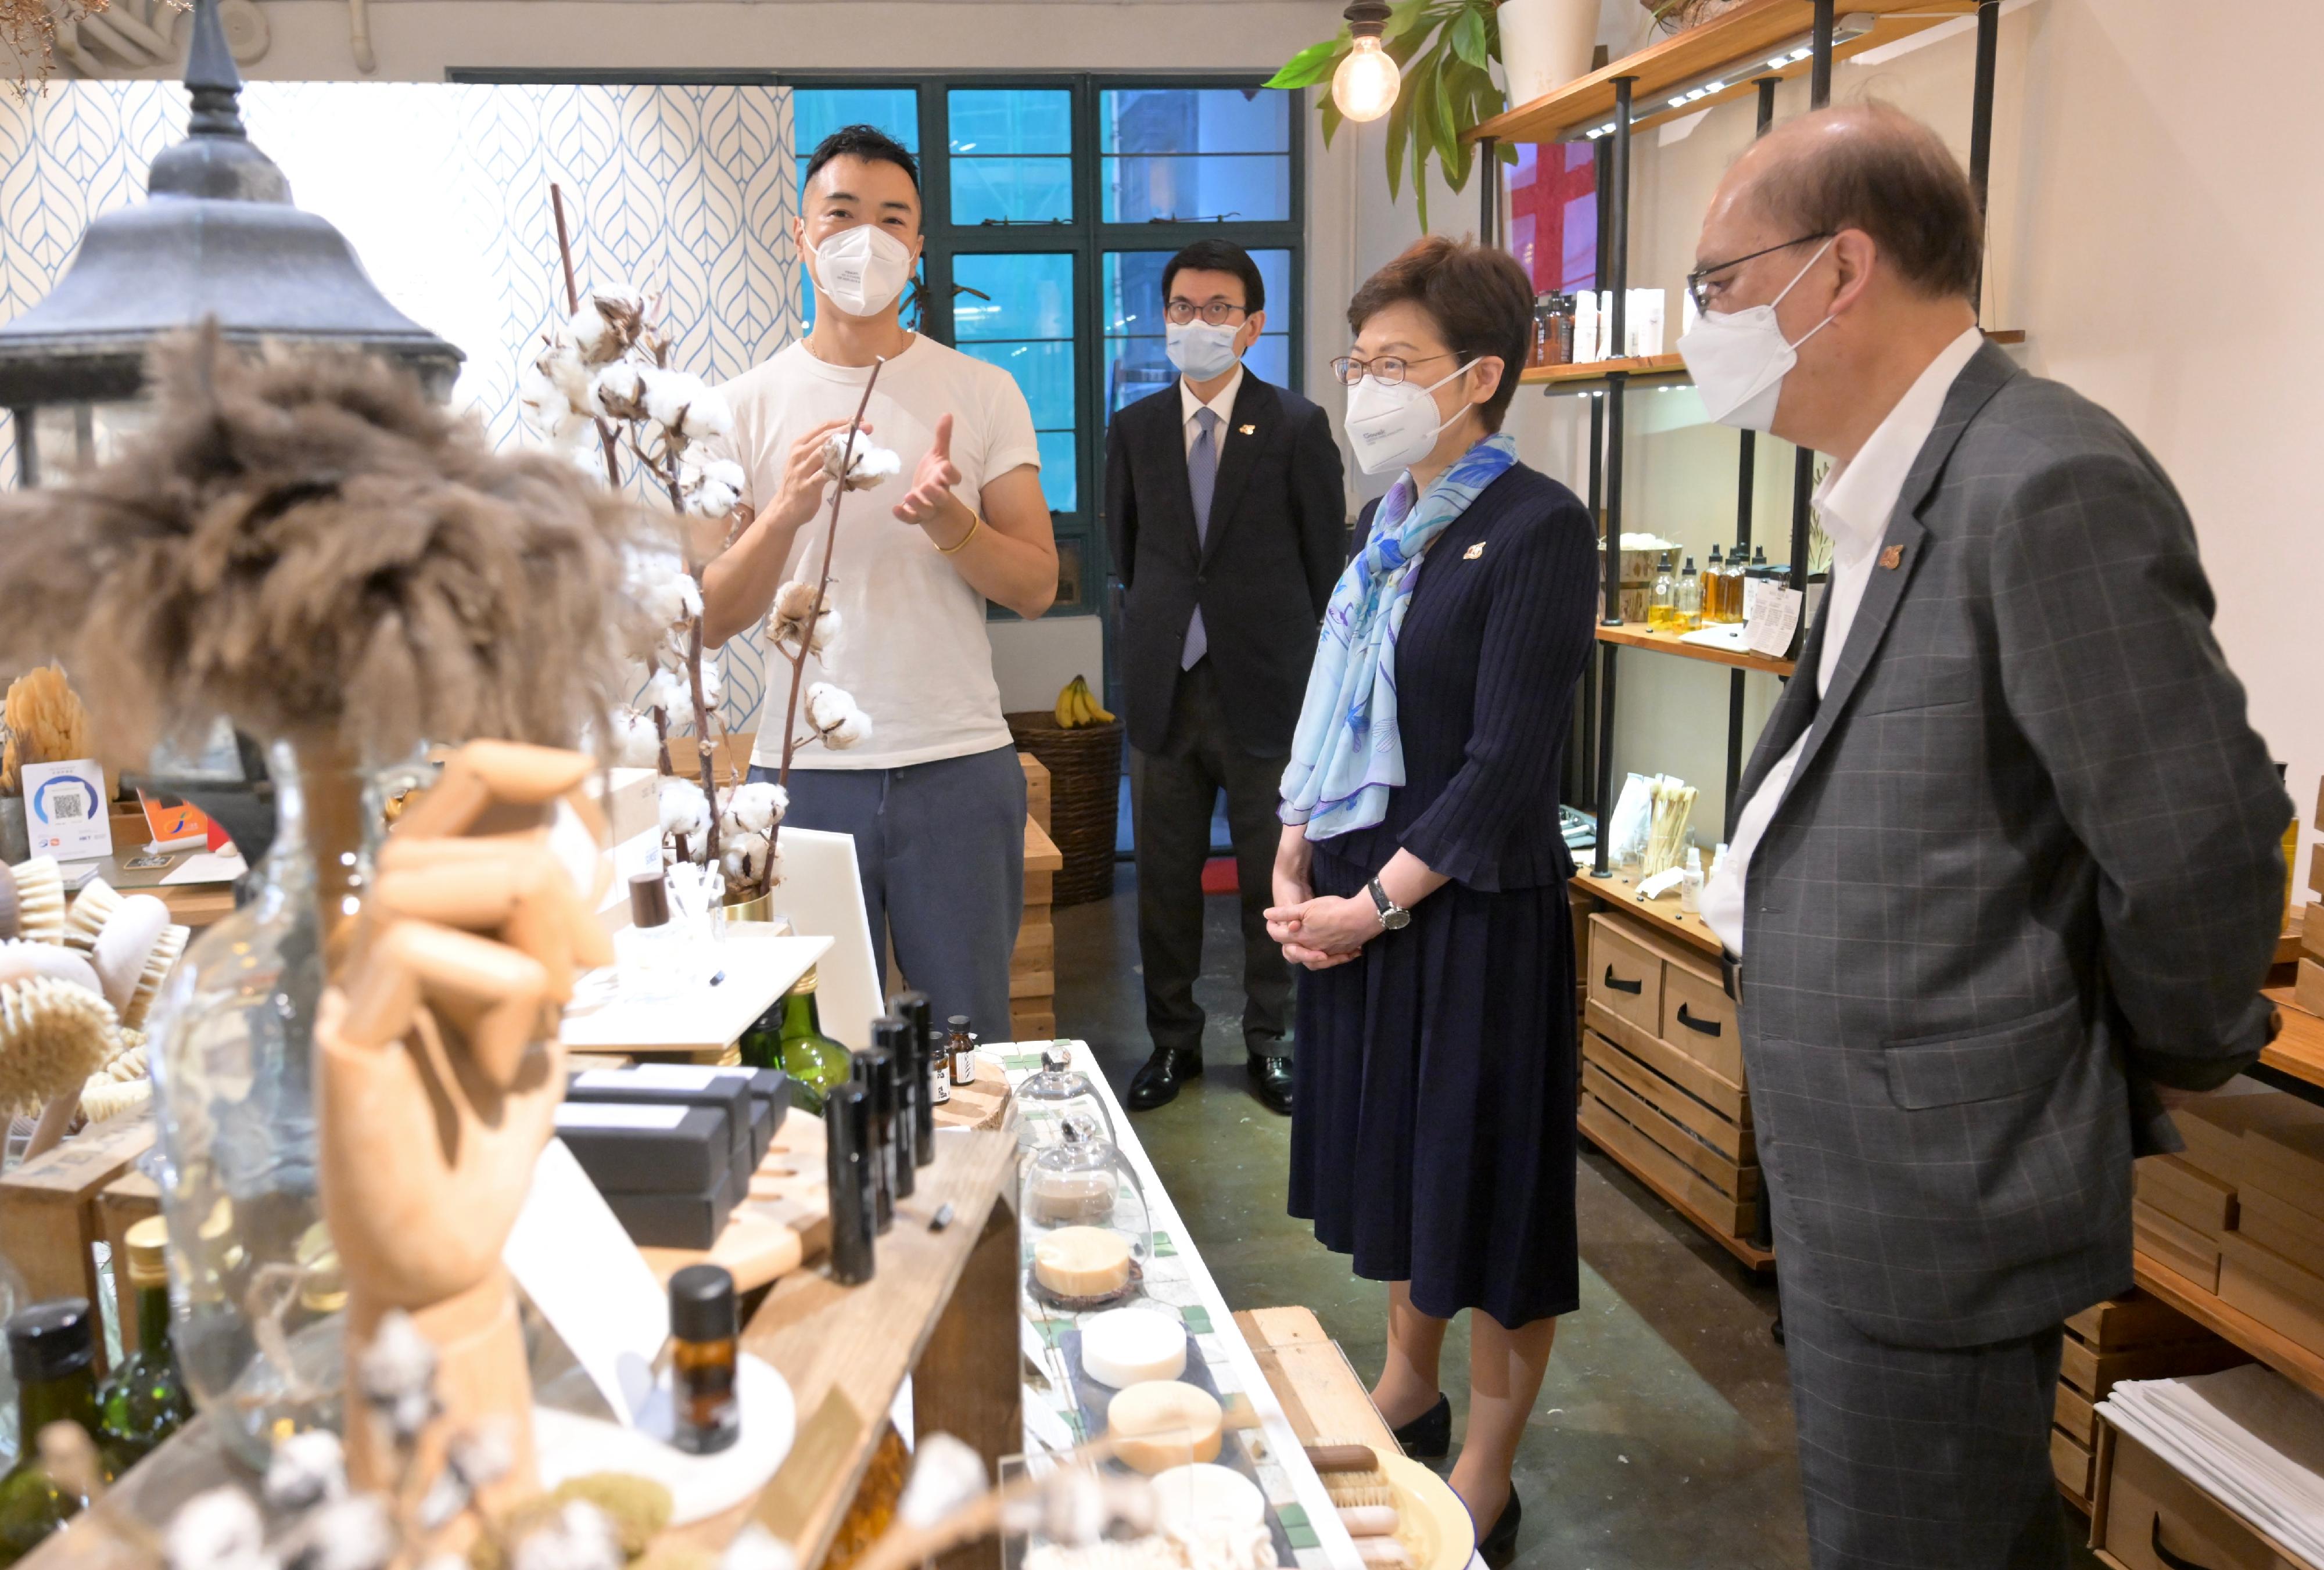 The Chief Executive, Mrs Carrie Lam, today (June 14) visited PMQ. Photo shows Mrs Lam (second right), accompanied by the Secretary for Commerce and Economic Development, Mr Edward Yau (second left), visiting a design studio and chatting with the tenant.